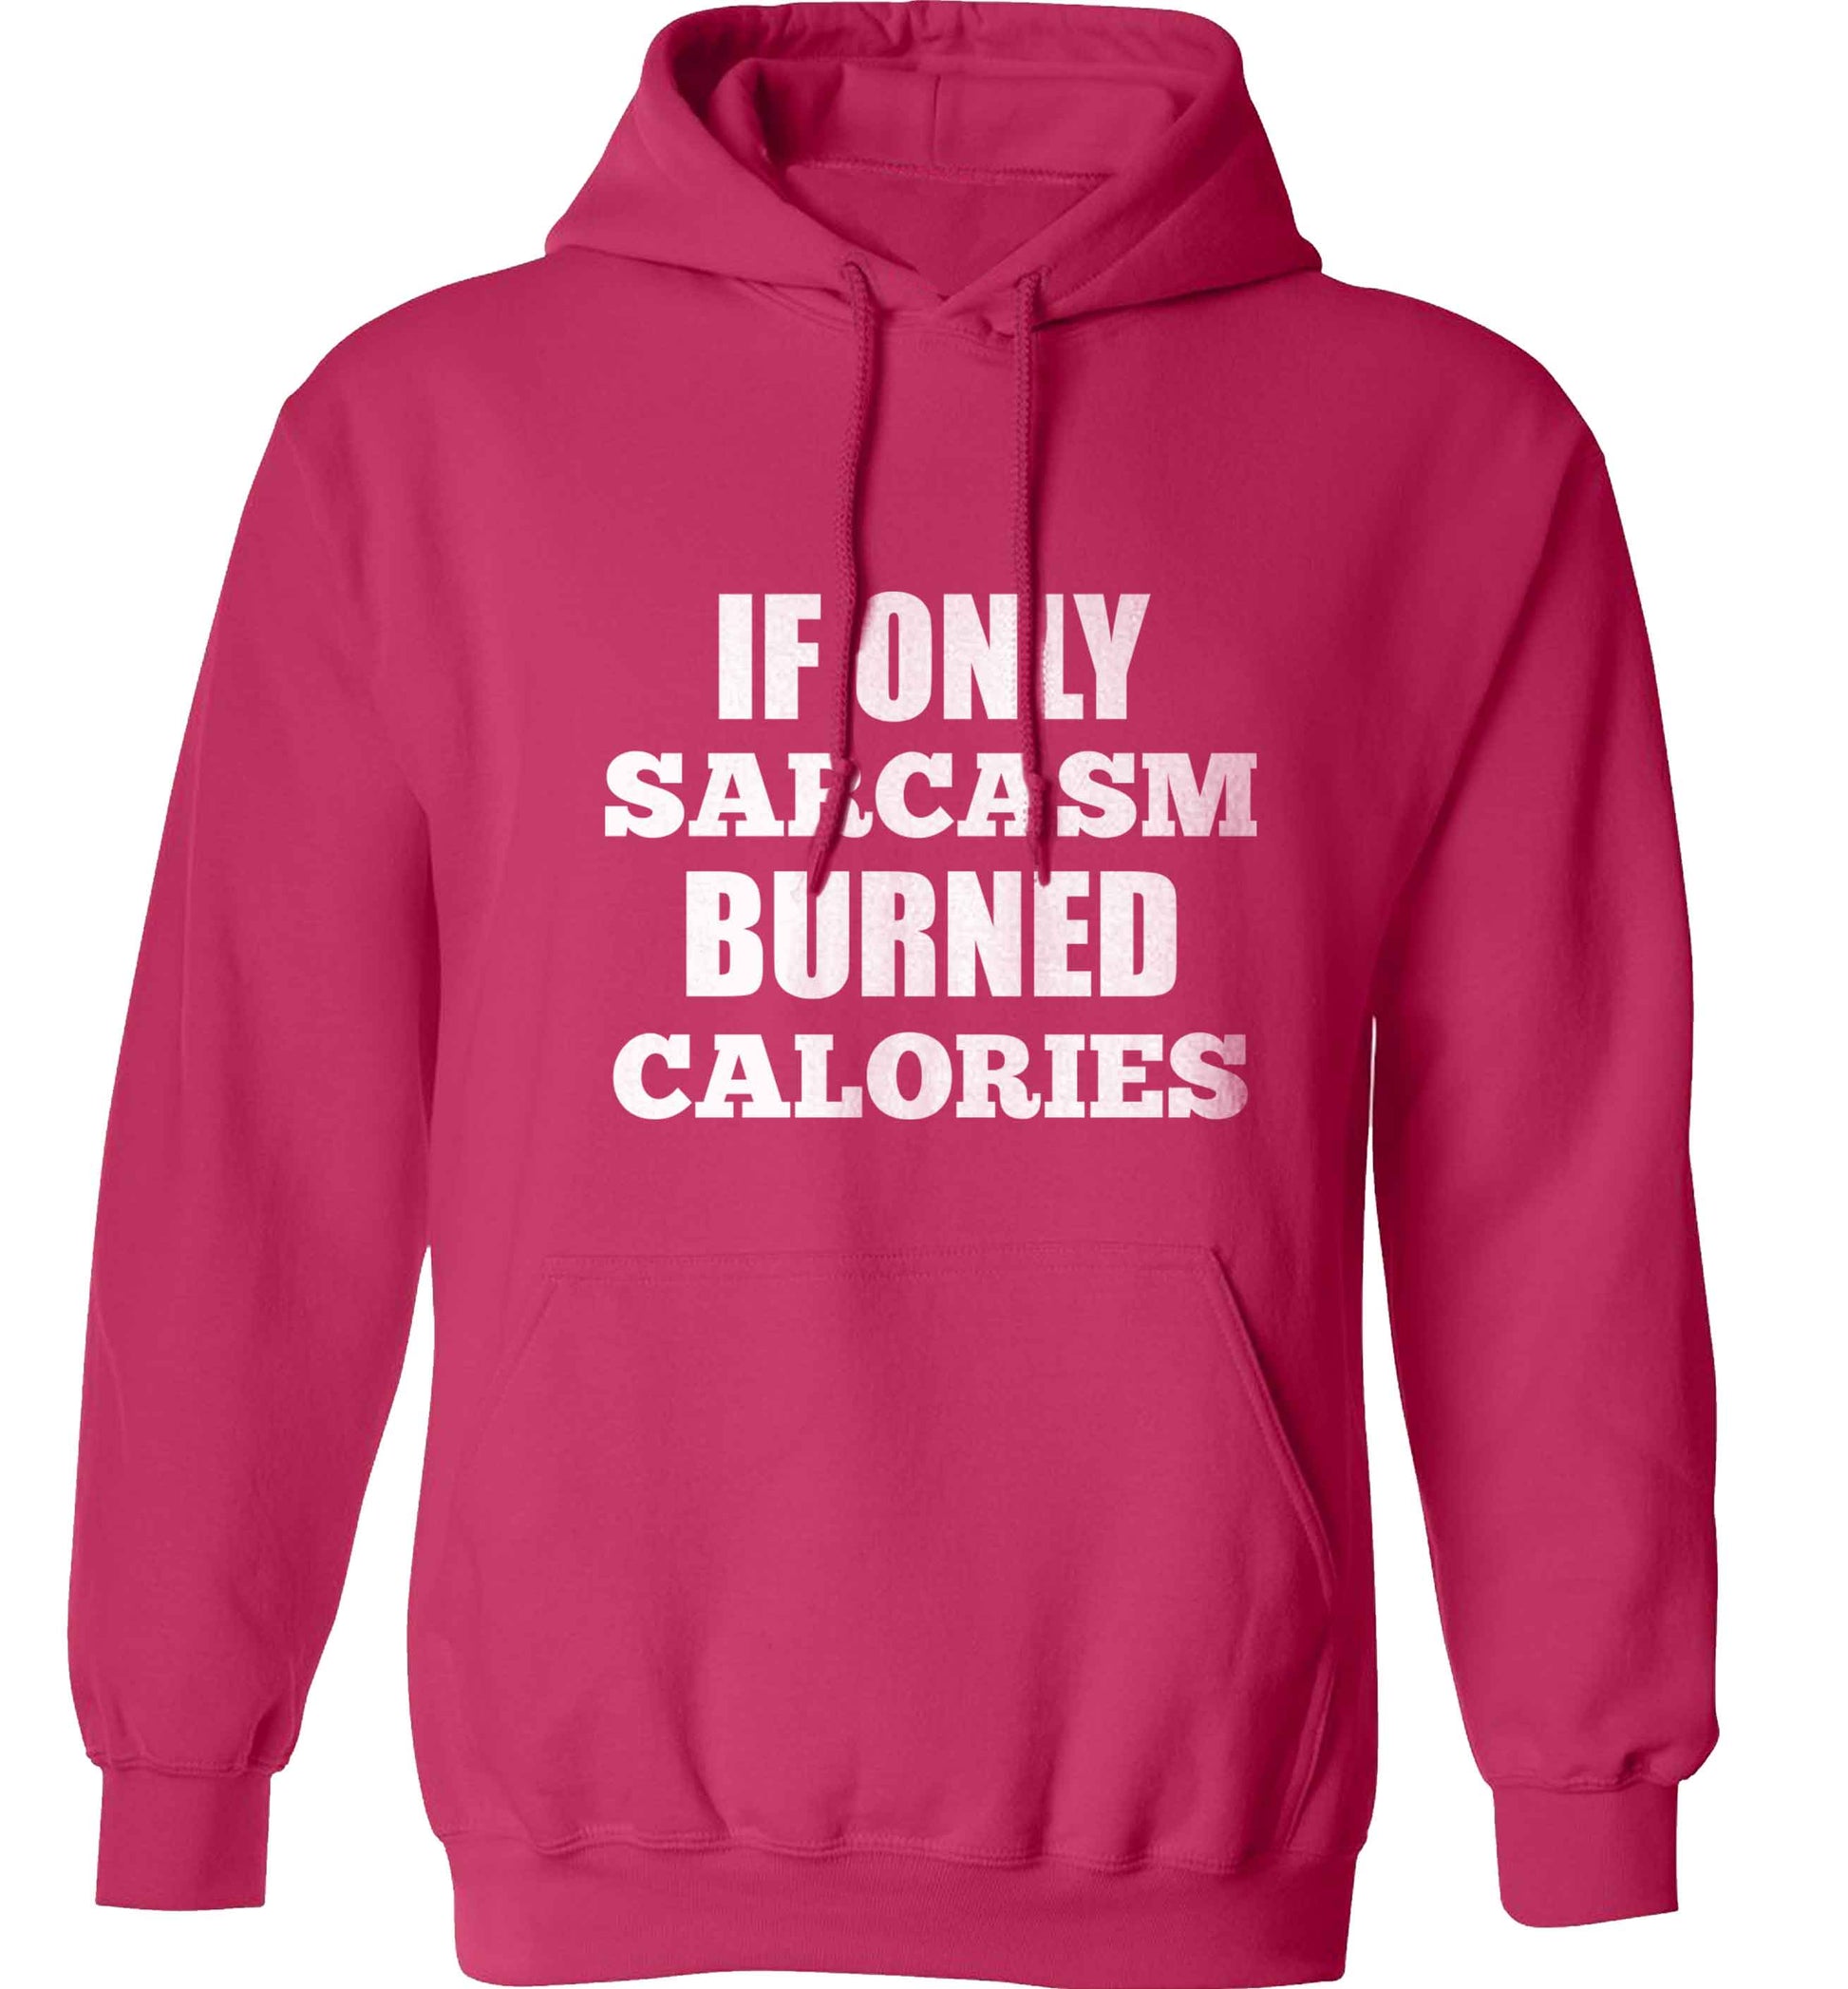 If only sarcasm burned calories adults unisex pink hoodie 2XL